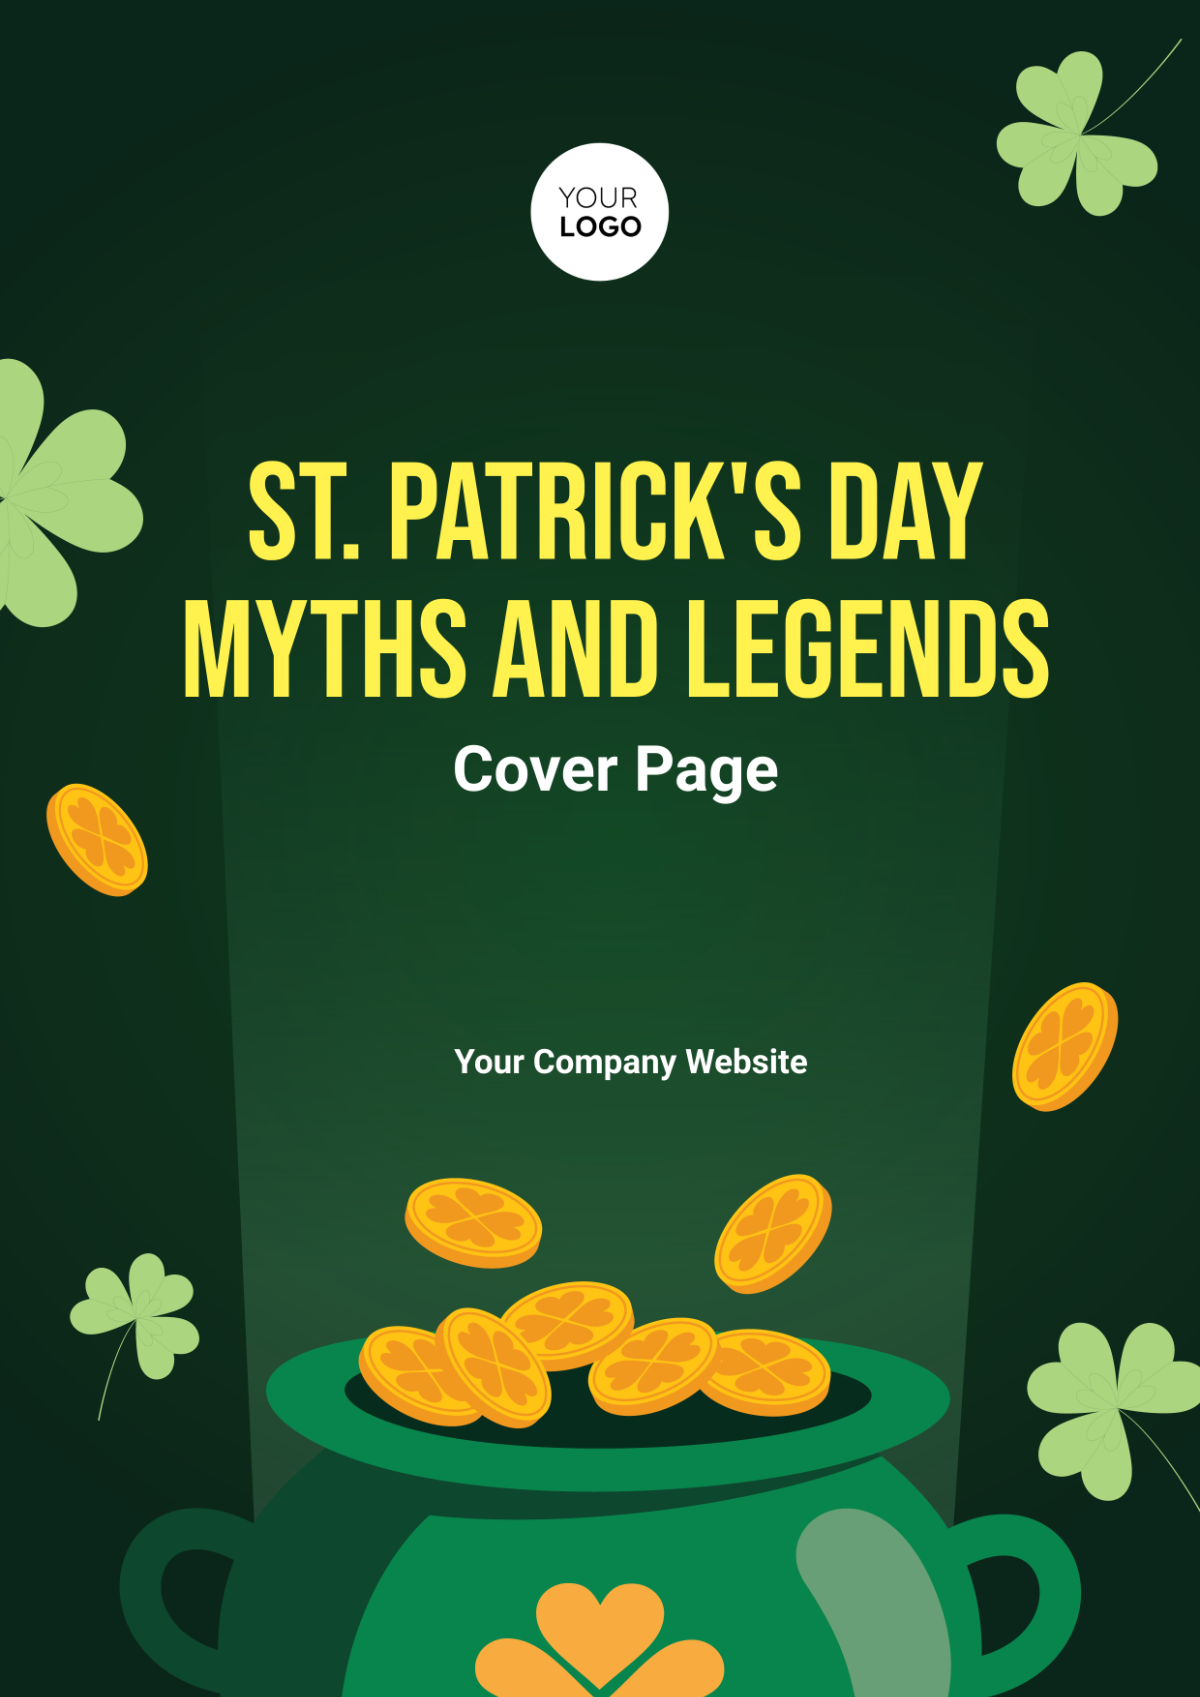 St. Patrick's Day Myths and Legends Cover Page Template